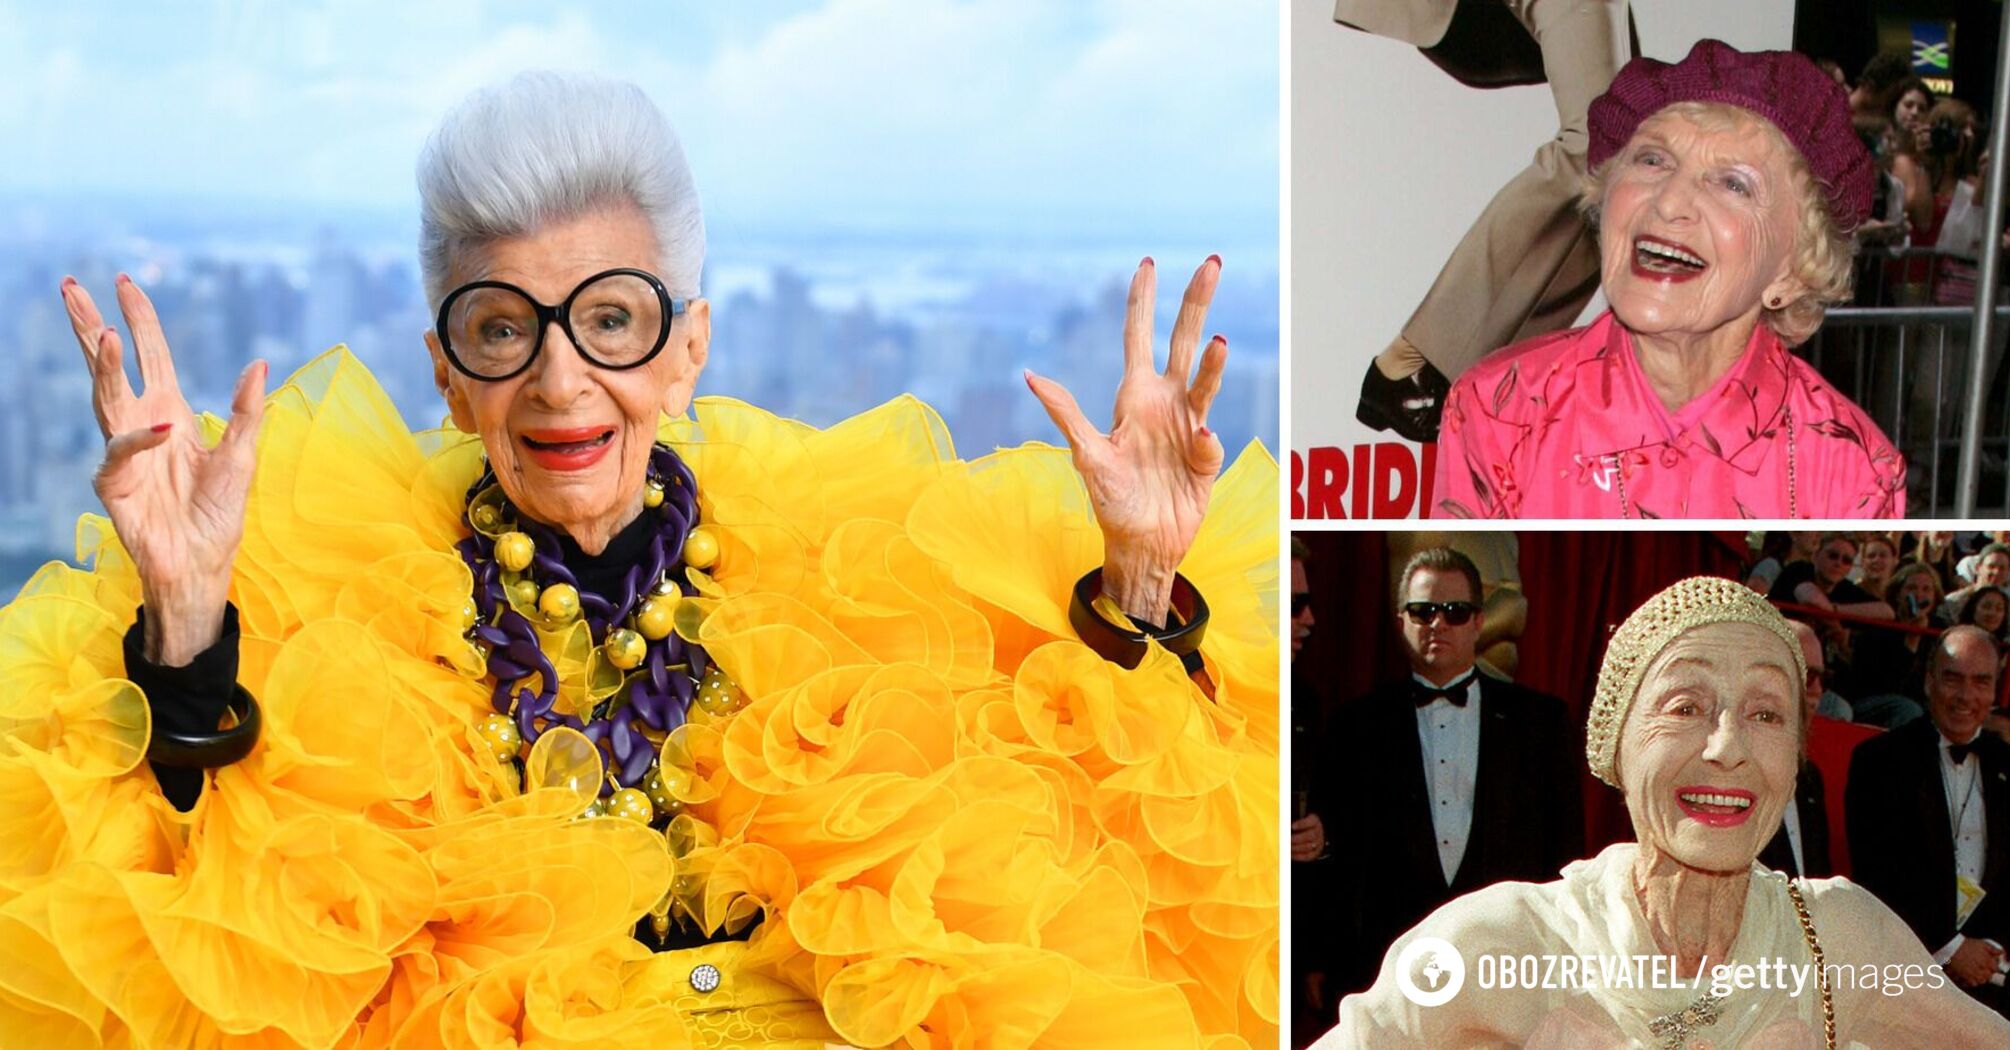 Grandmother-rapper, 'NYC fashion queen' and 3 other celebrities who lived to be 100 years old and older. Photo